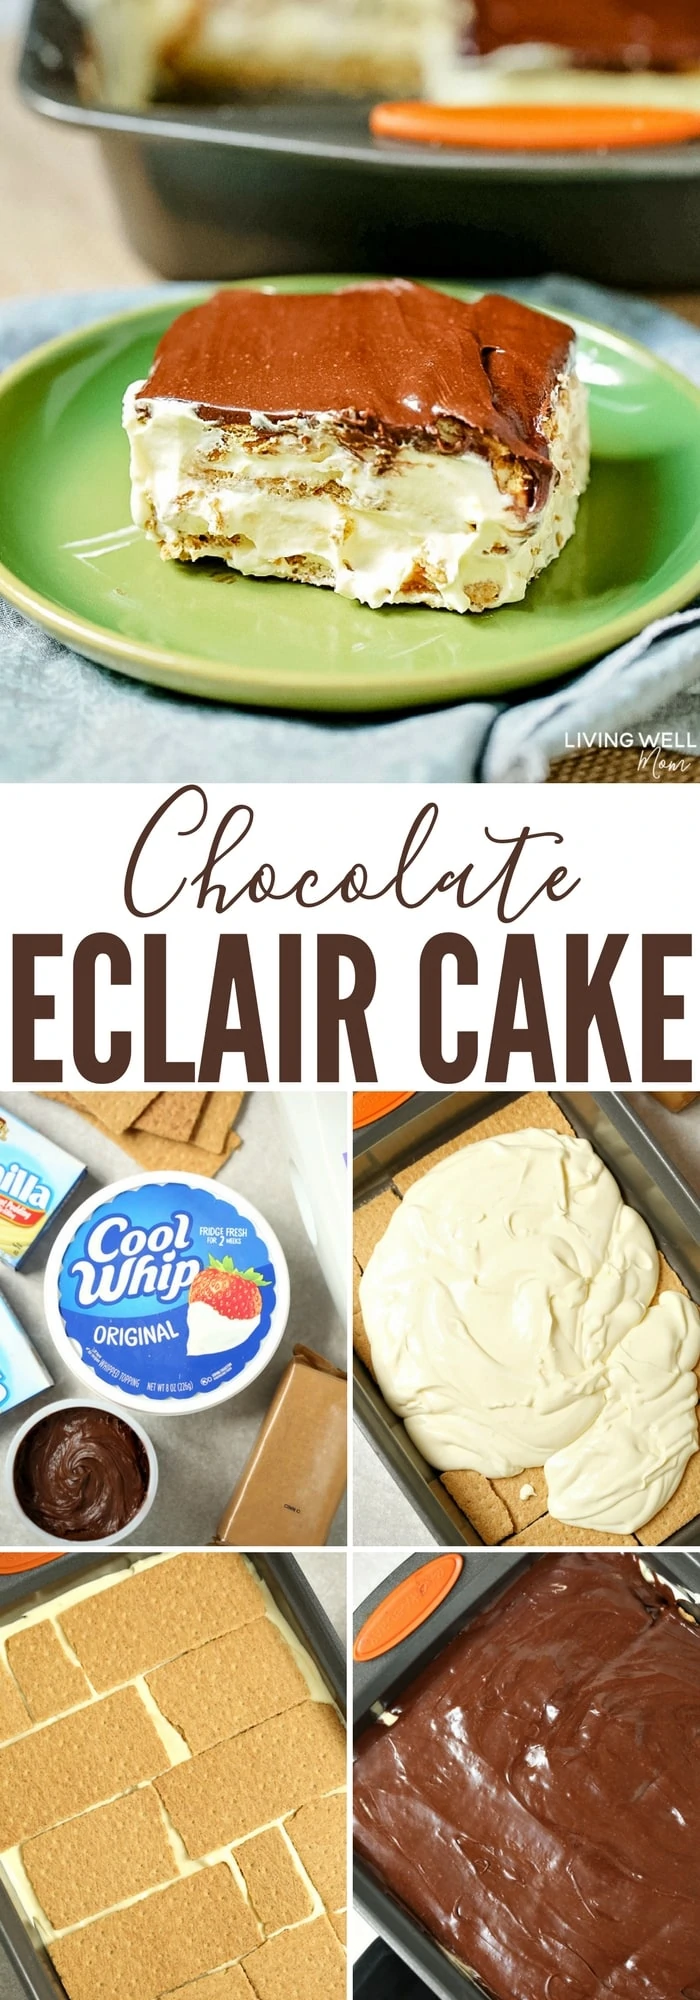 collection of photos for chocolate eclair cake recipe